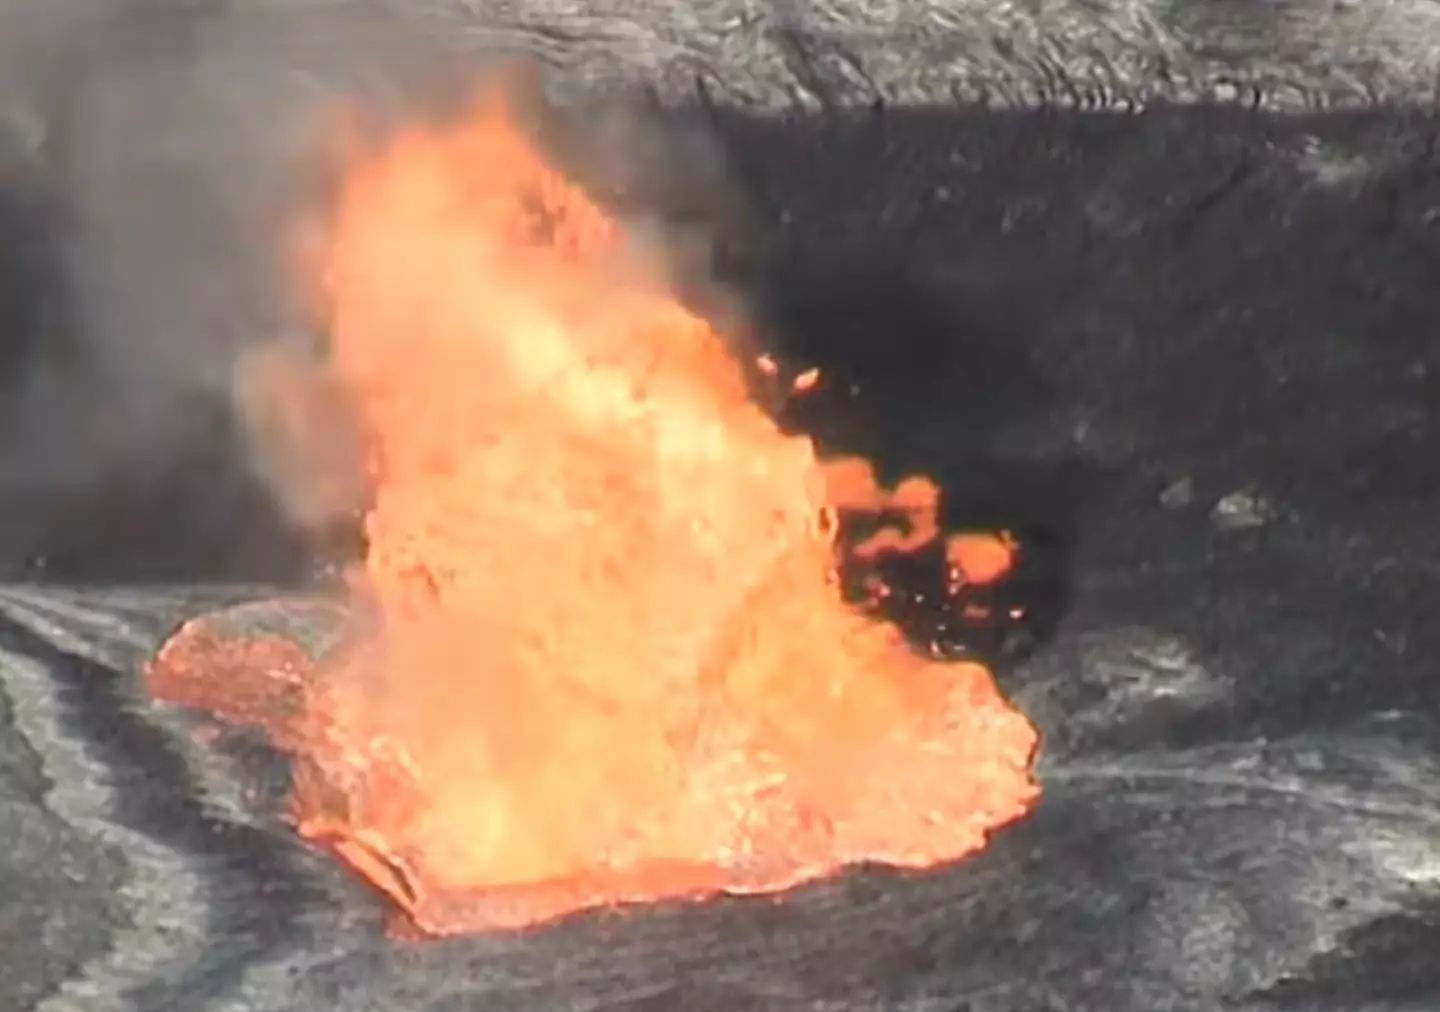 "The hole is much bigger and lava is shooting out of it, let's hope it stops doing that."